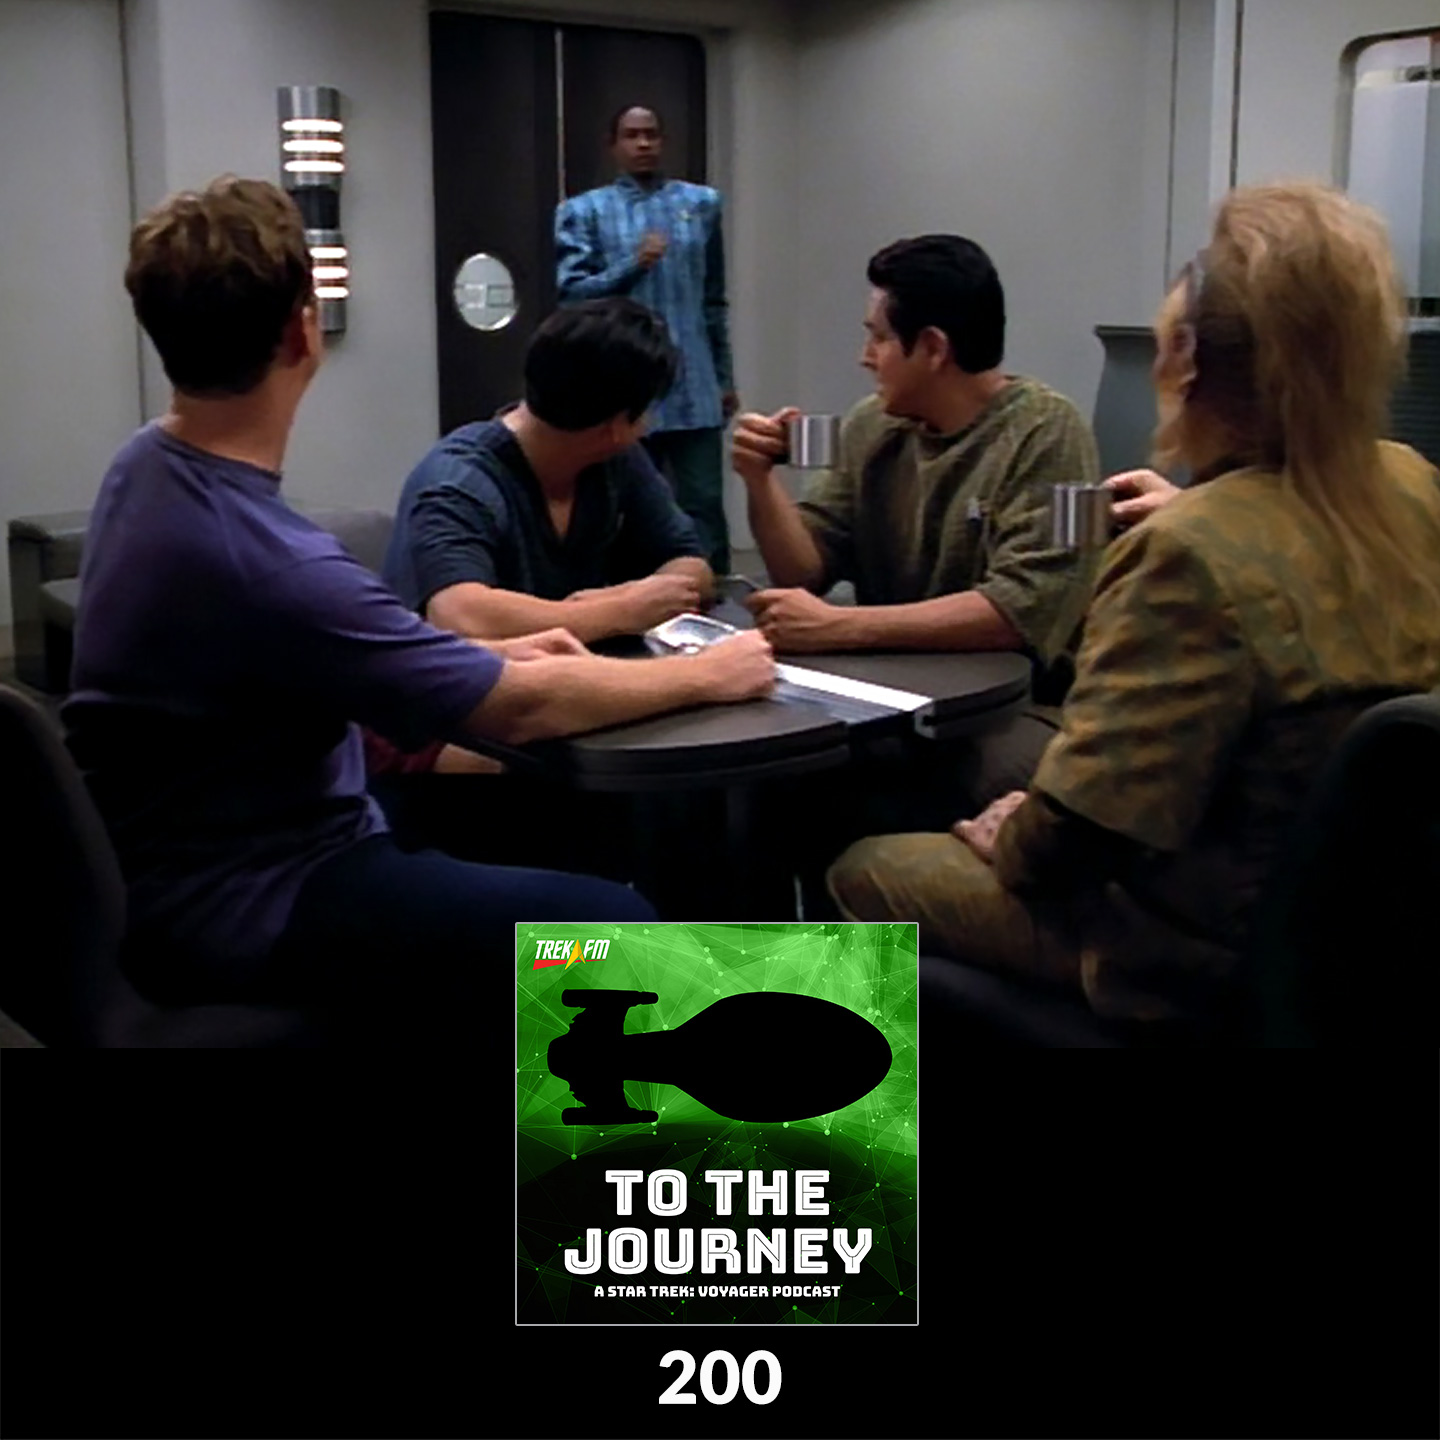 To The Journey 200: Pon Farr Night at the Playboy Mansion - "Caretaker" and Celebrating 200 Episodes.